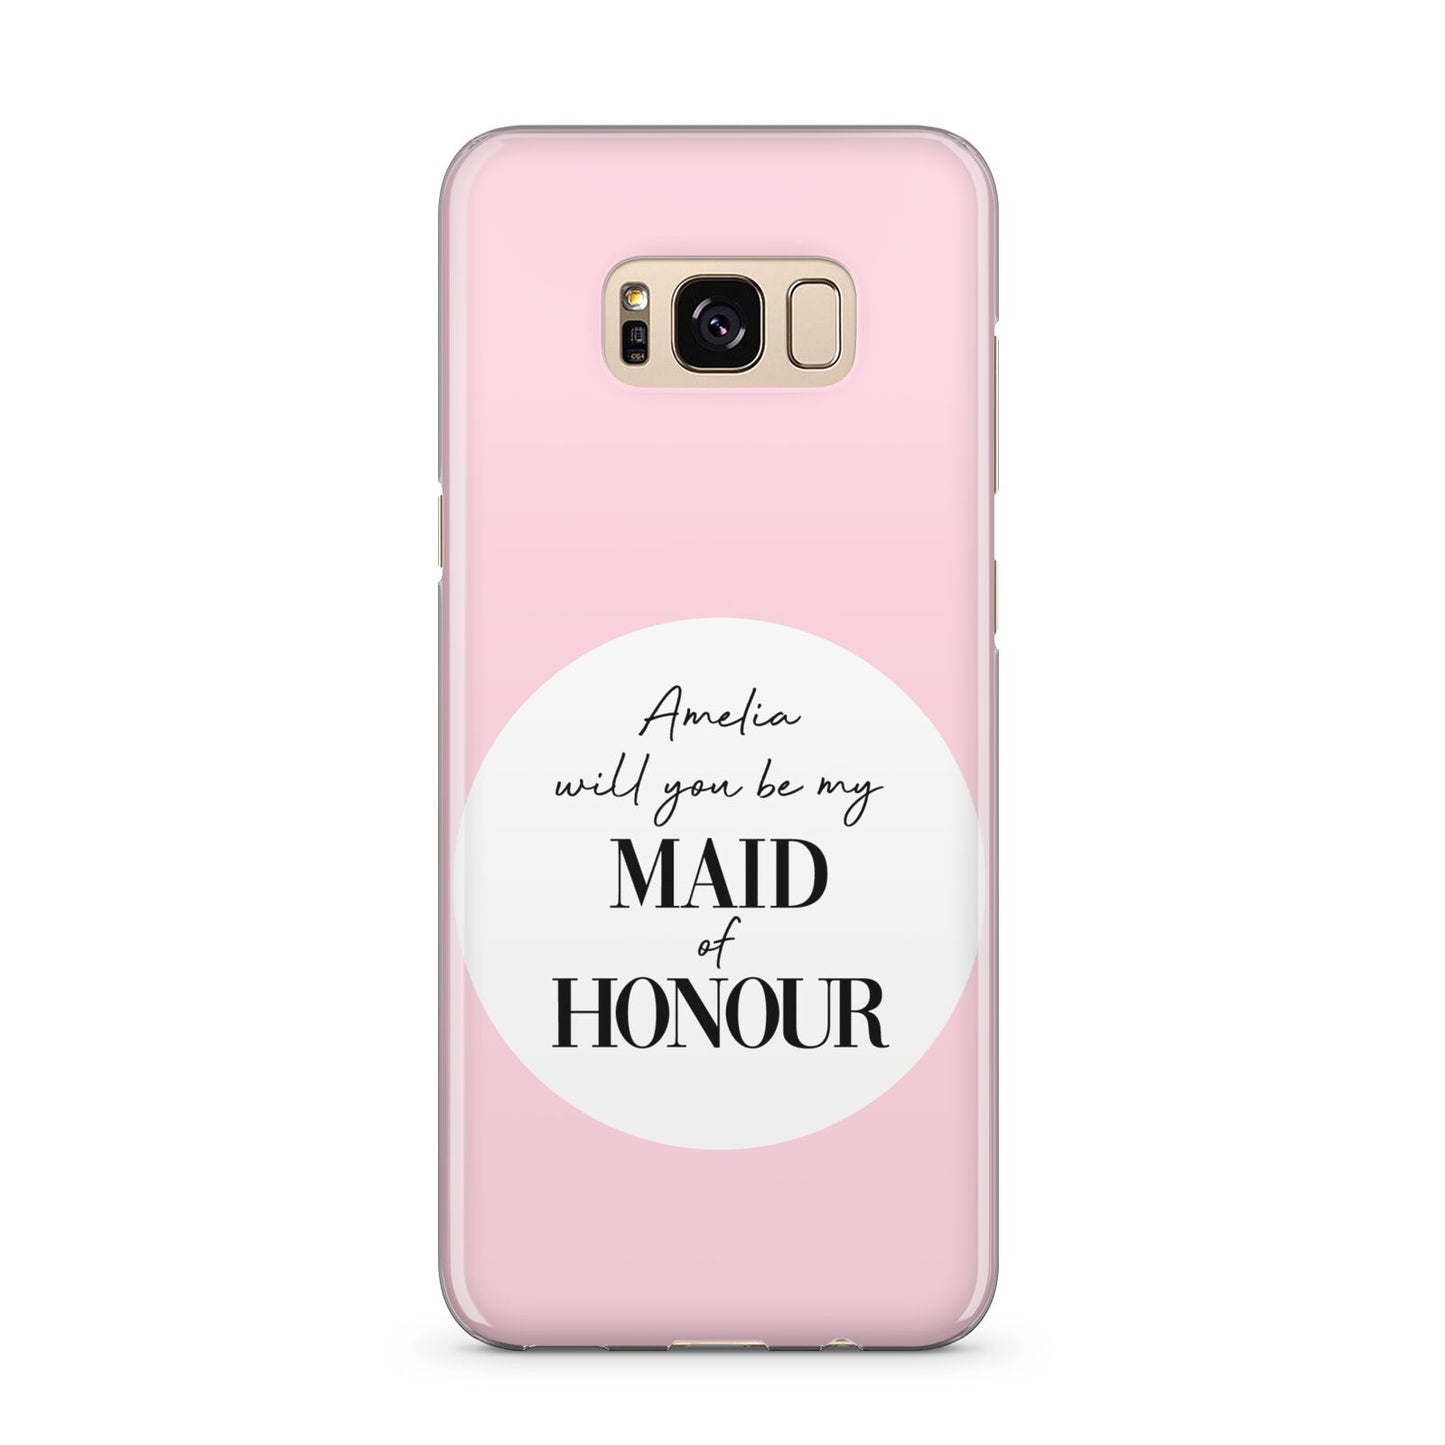 Will You Be My Maid Of Honour Samsung Galaxy S8 Plus Case